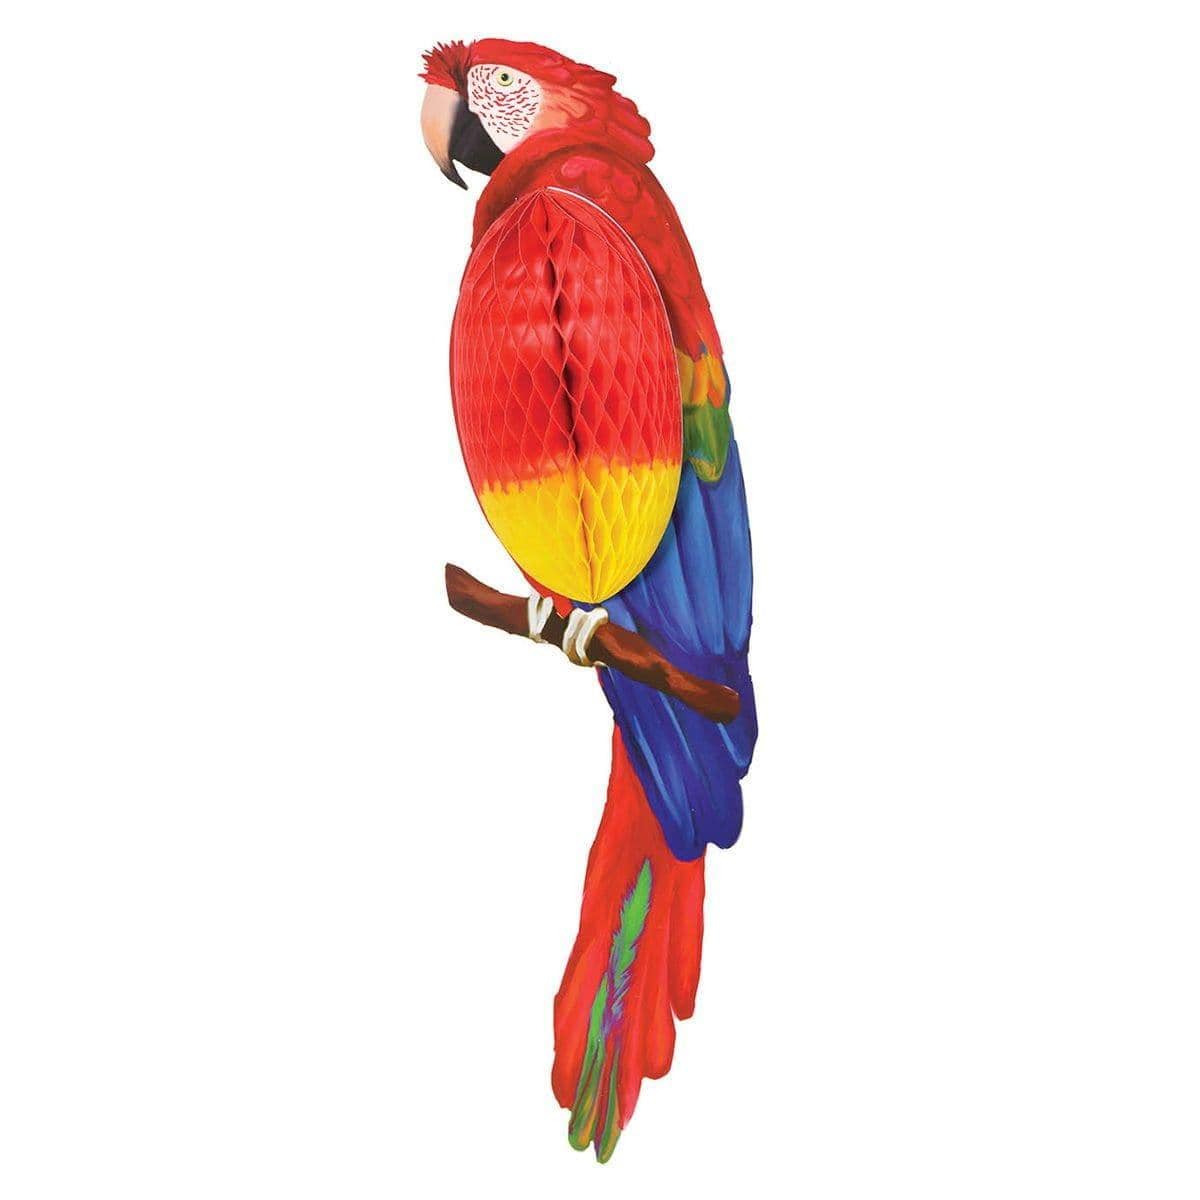 Buy Theme Party Parrot Honeycomb Decoration, 23 Inches sold at Party Expert